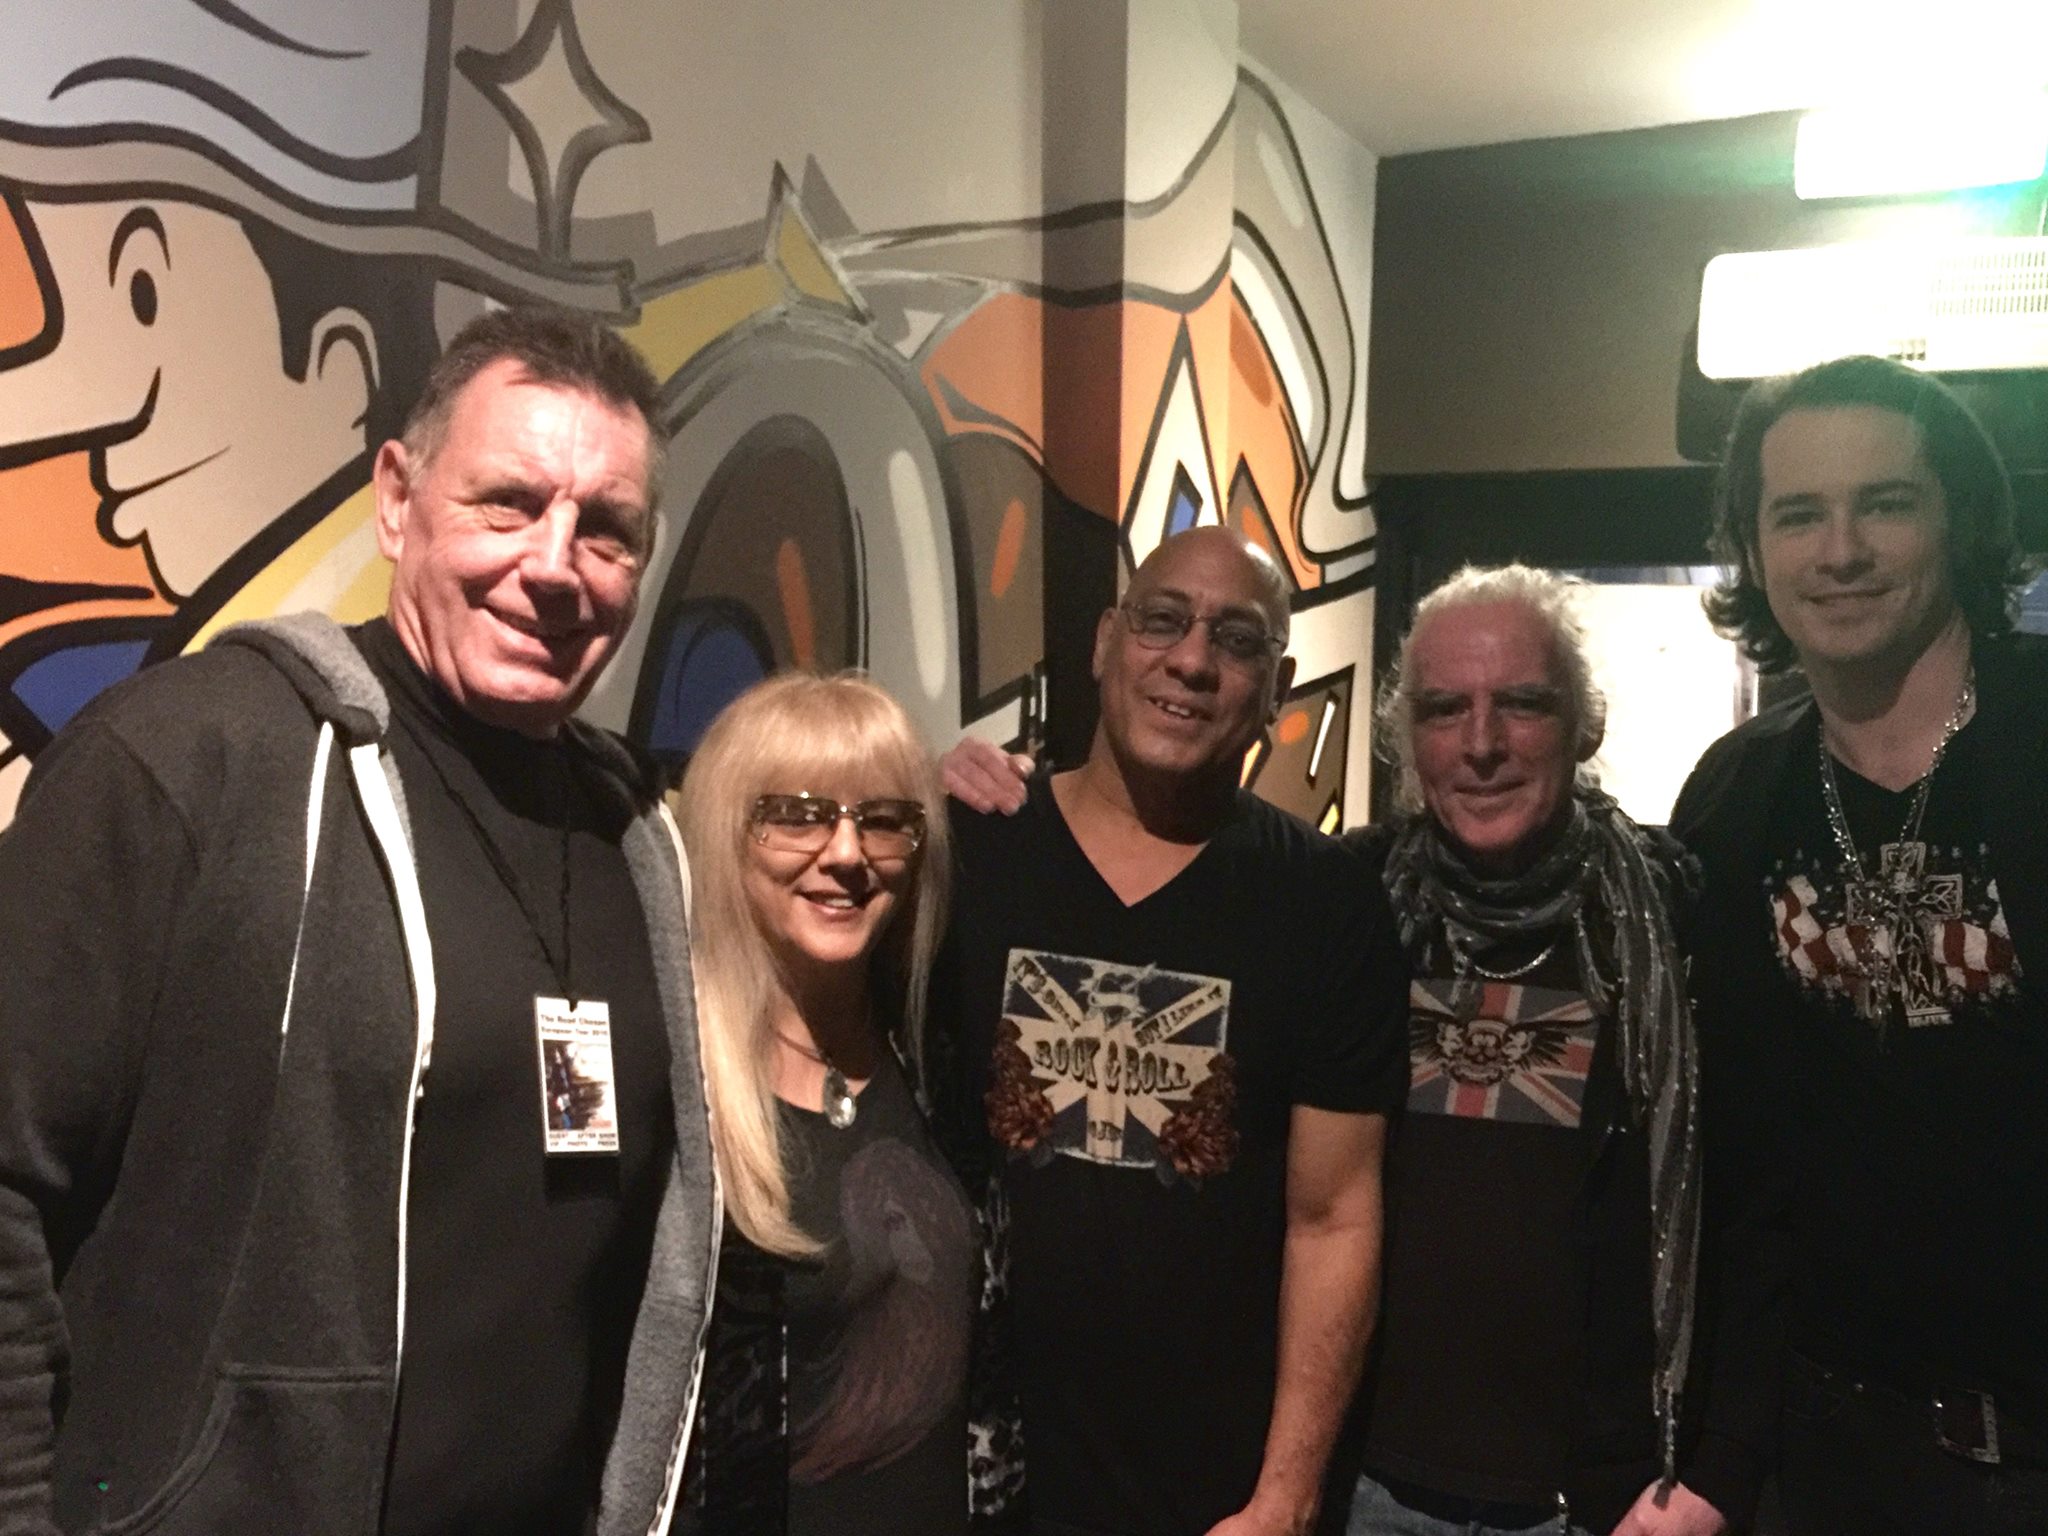 How many ICJUK designs can you see here?! Super lovely to receive this photo this evening from Ryan McGarvy - from left to right My Dad, My Mum, My Bridesmaid aka Carmine Rojas, Manni (Tour Manager) and Ryan after their show tonight in the UK! 